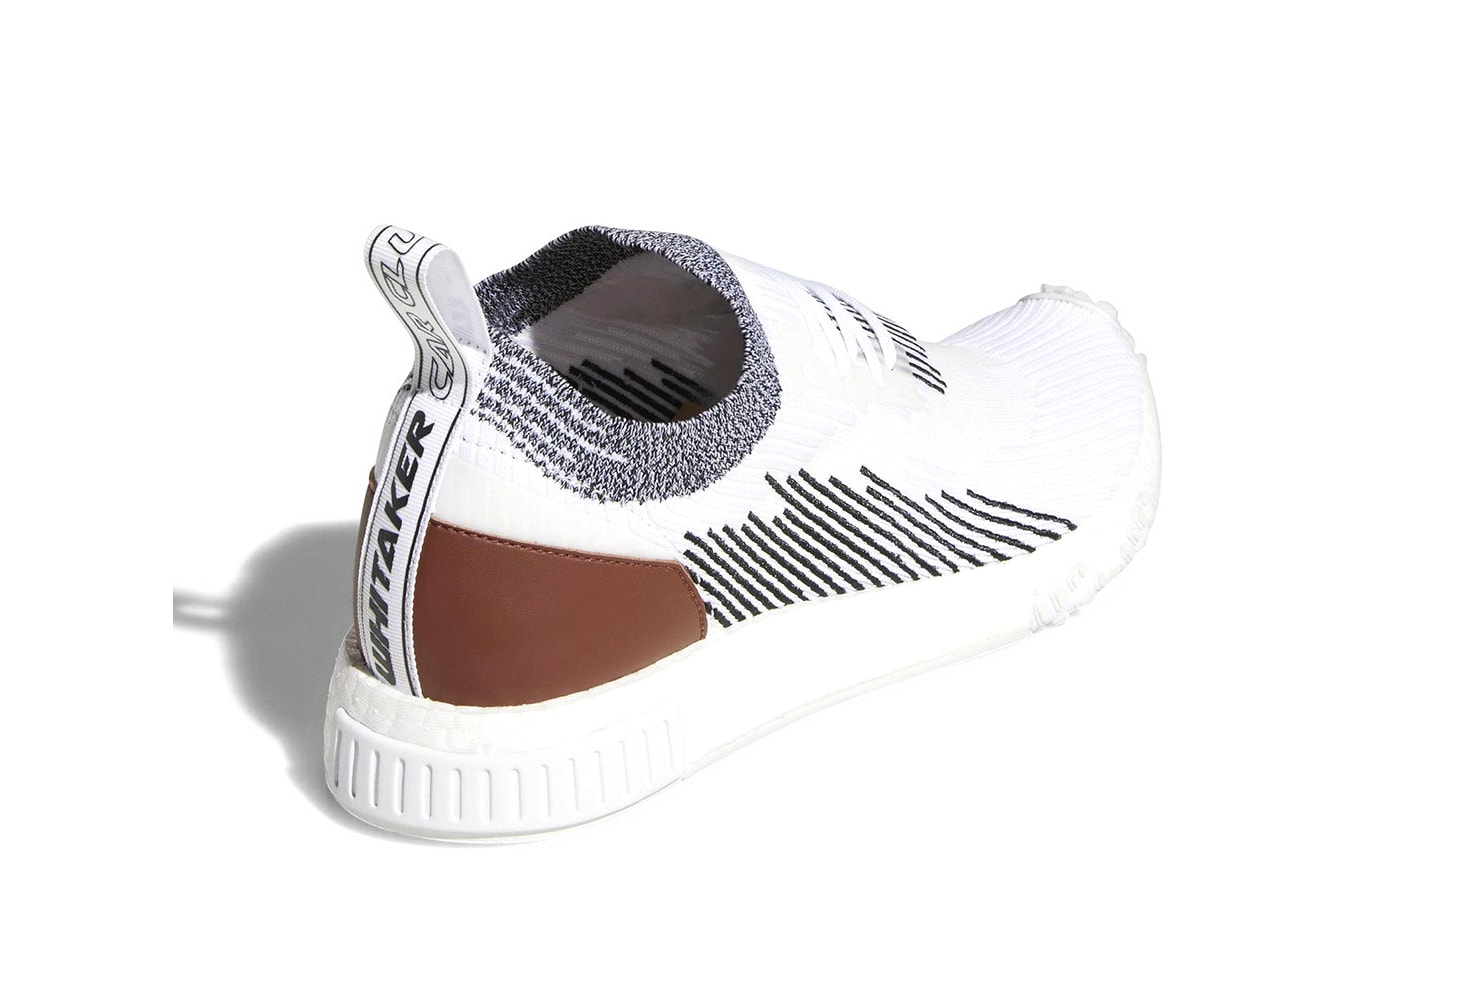 adidas NMD Racer leather heel patch Whitaker Car Club white black footwear sneakers